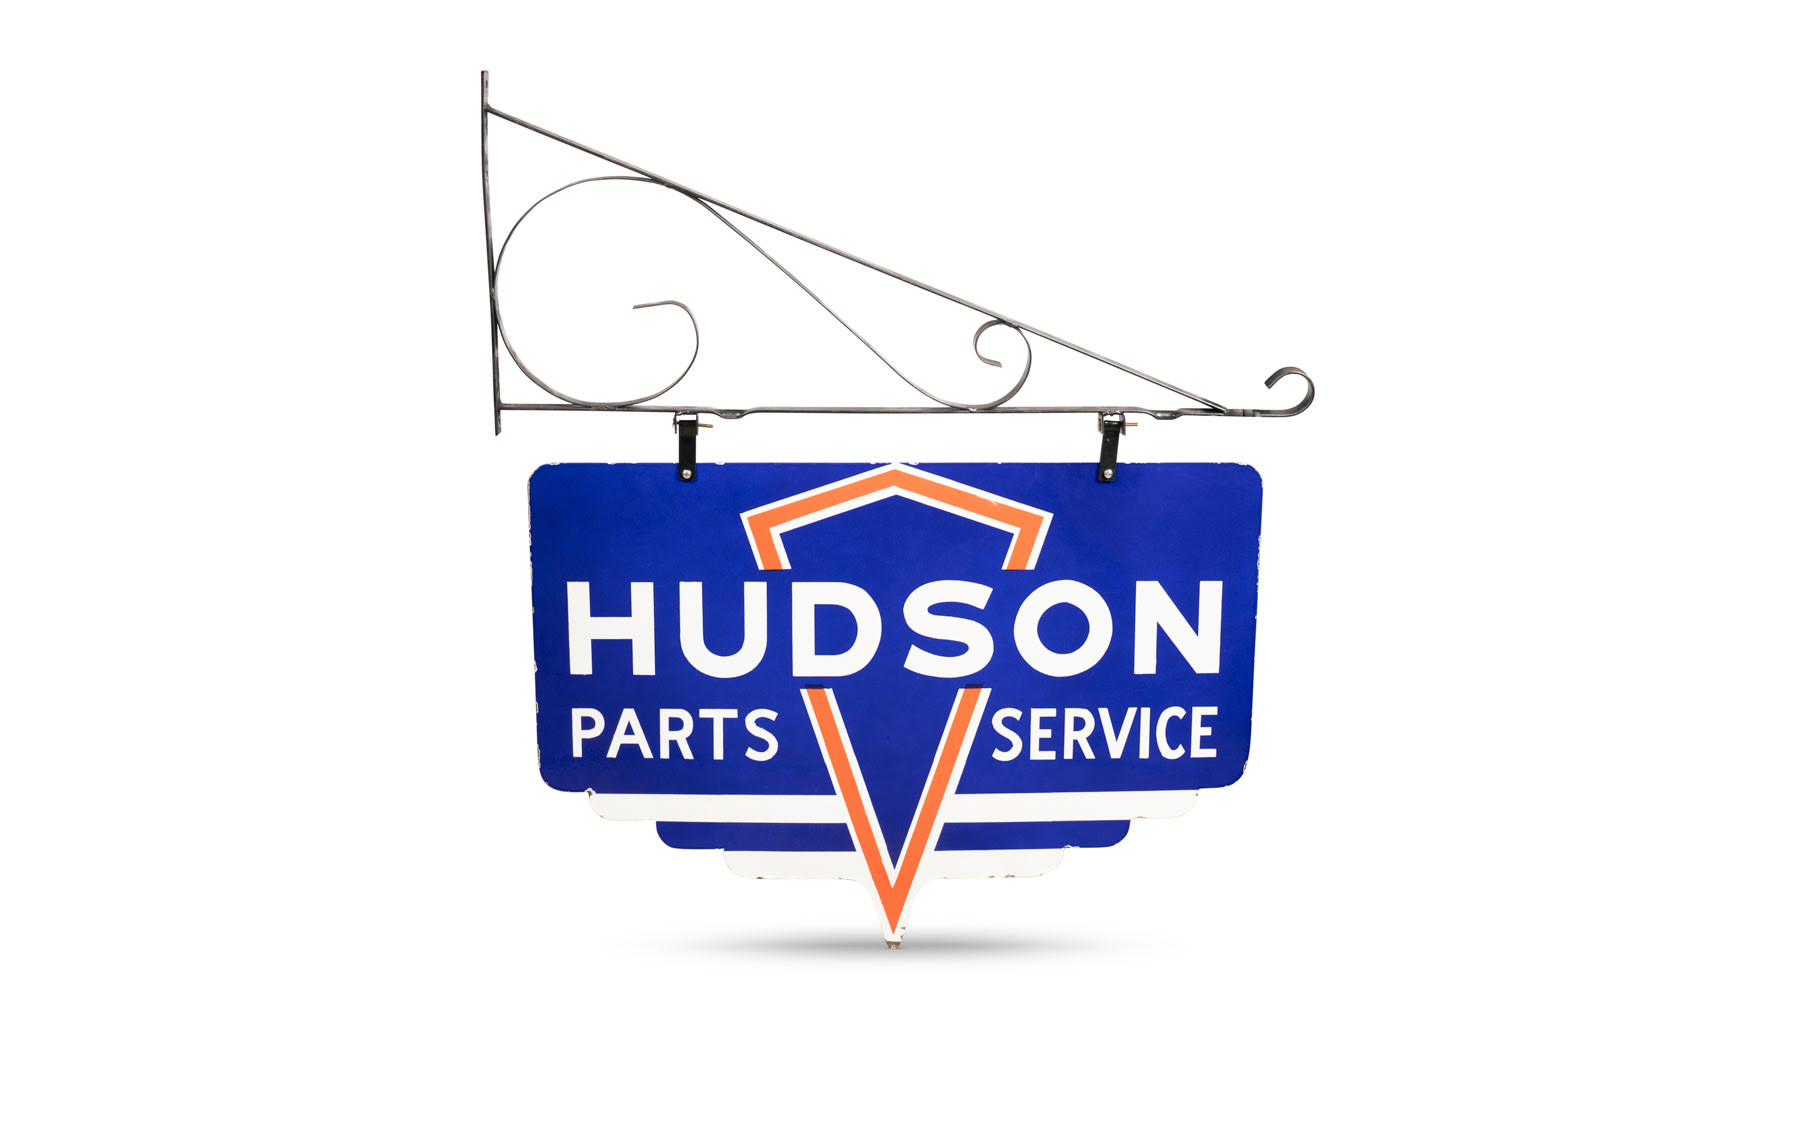 Hudson Parts and Service Sign